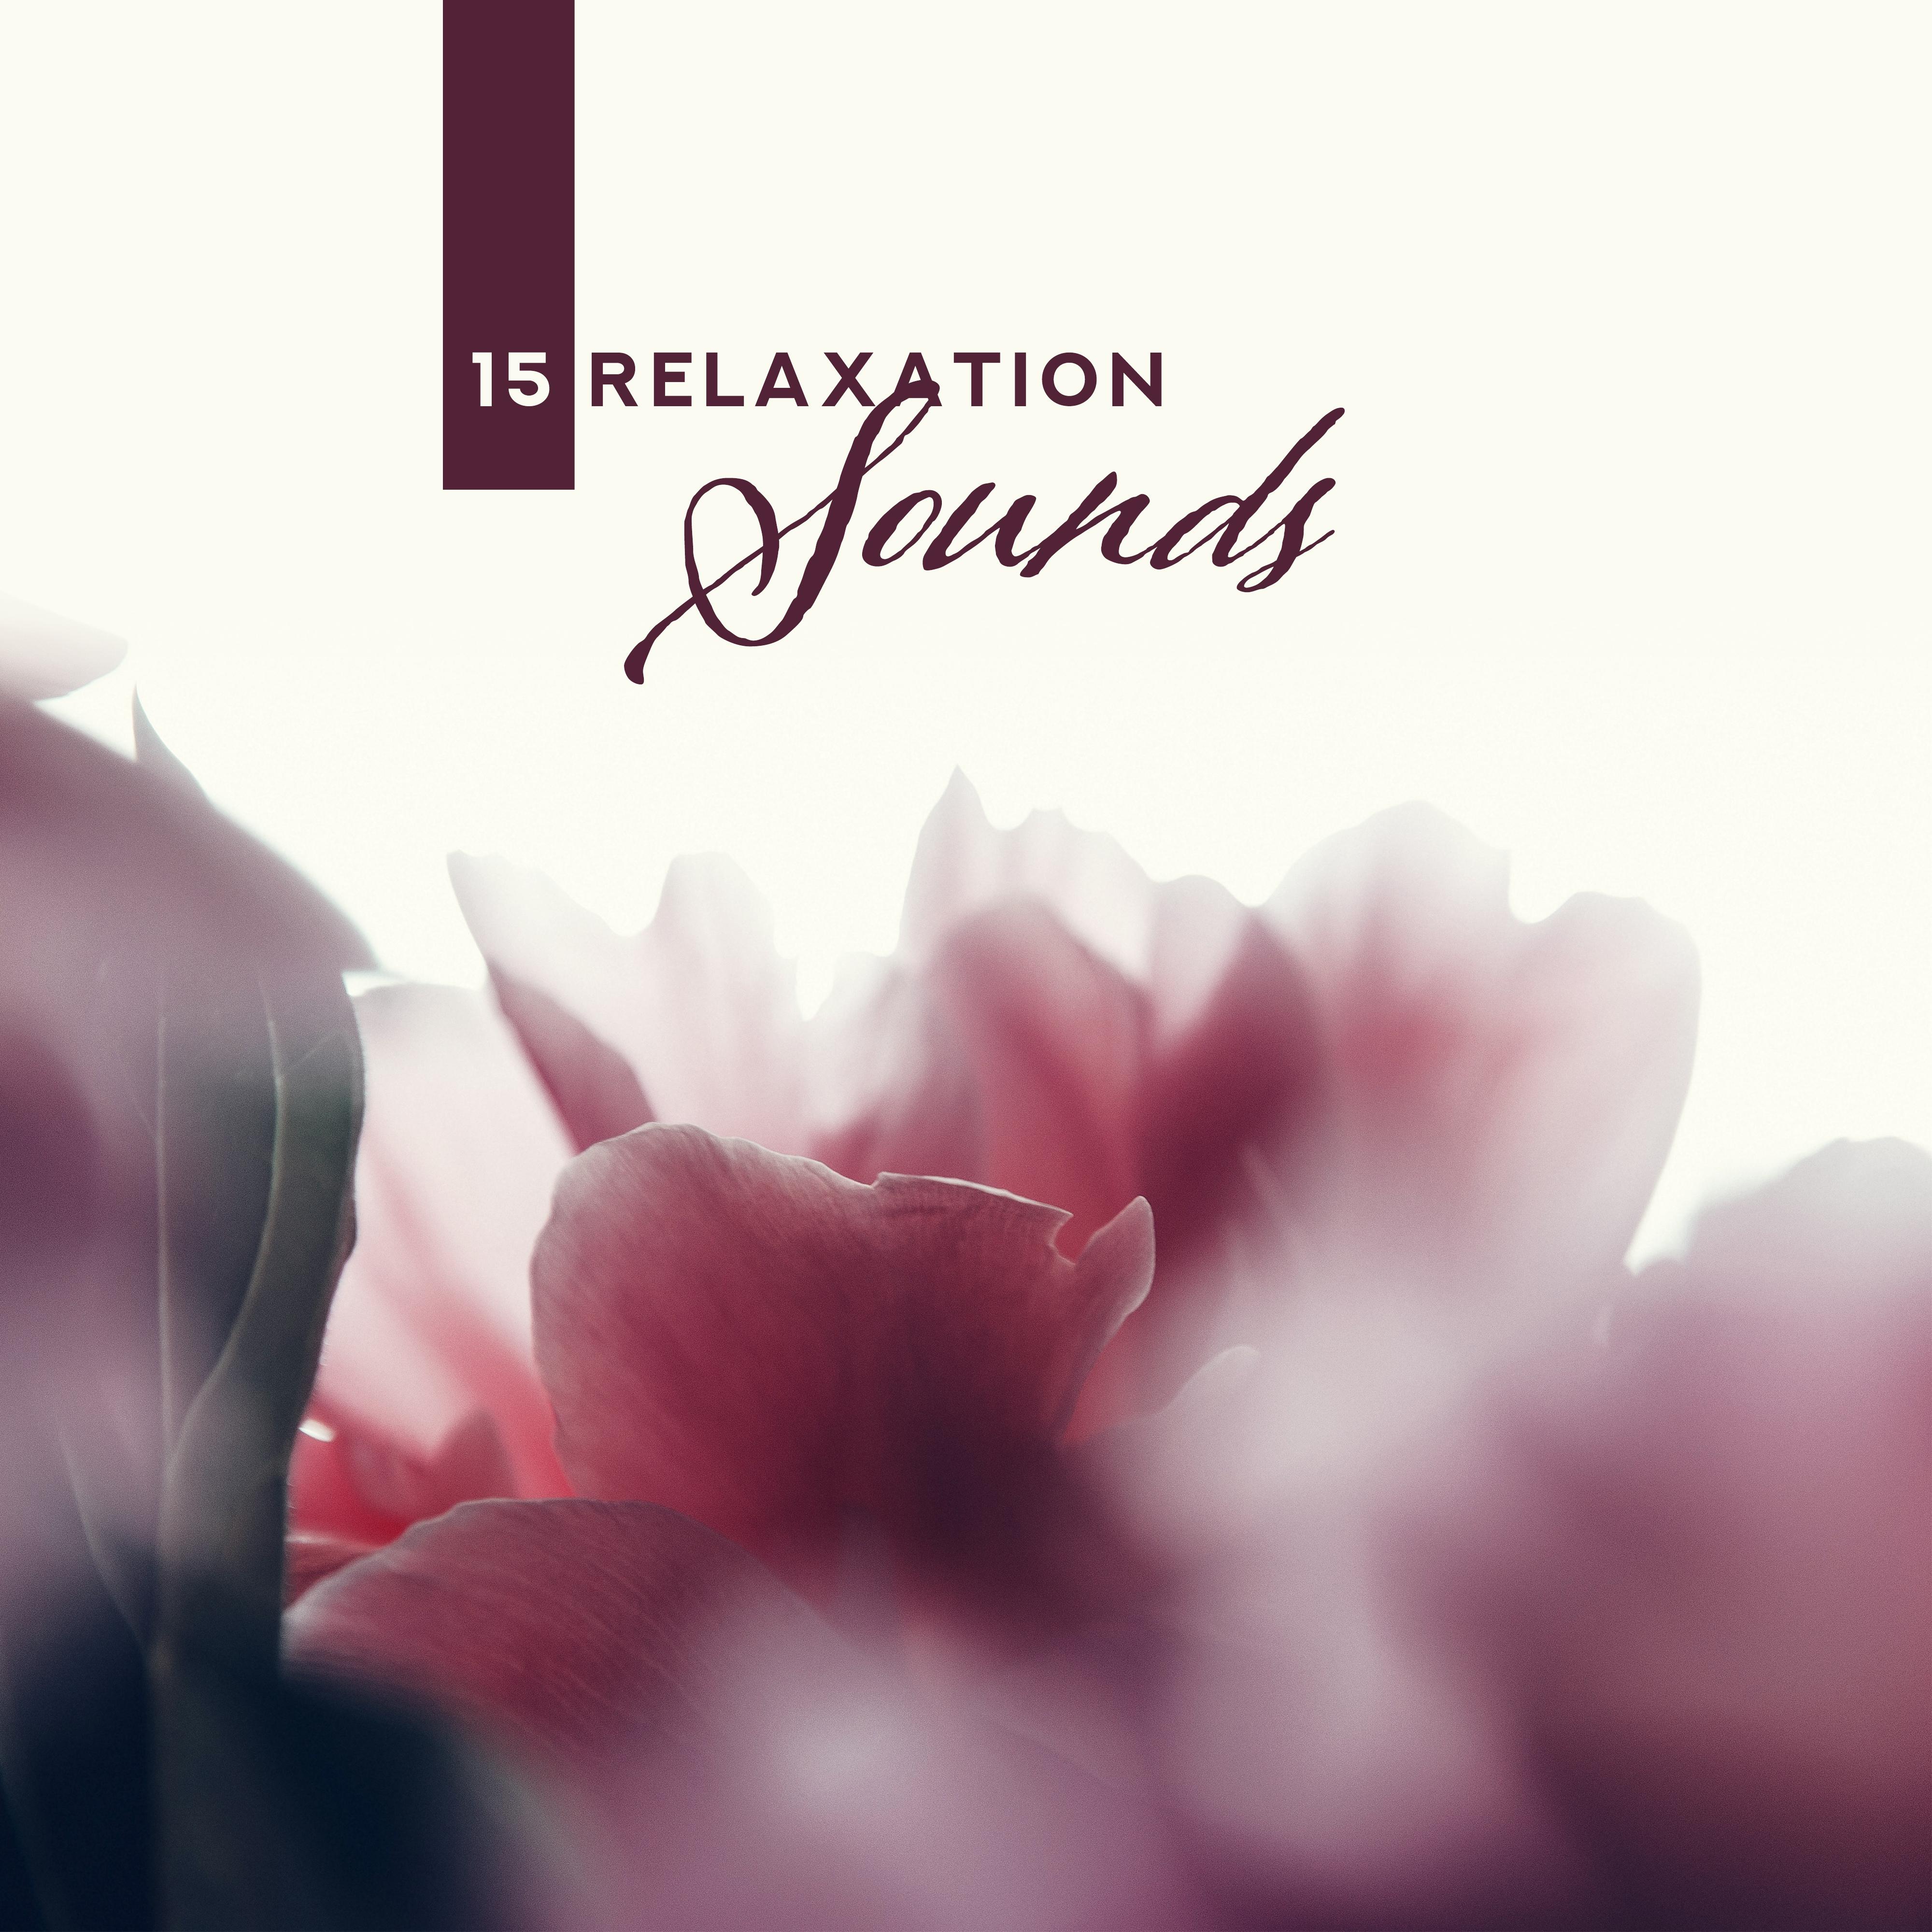 15 Relaxation Sounds: Chill Out 2019, Beach Music, Deep Vibes, Reduce Stress, Summer Relax